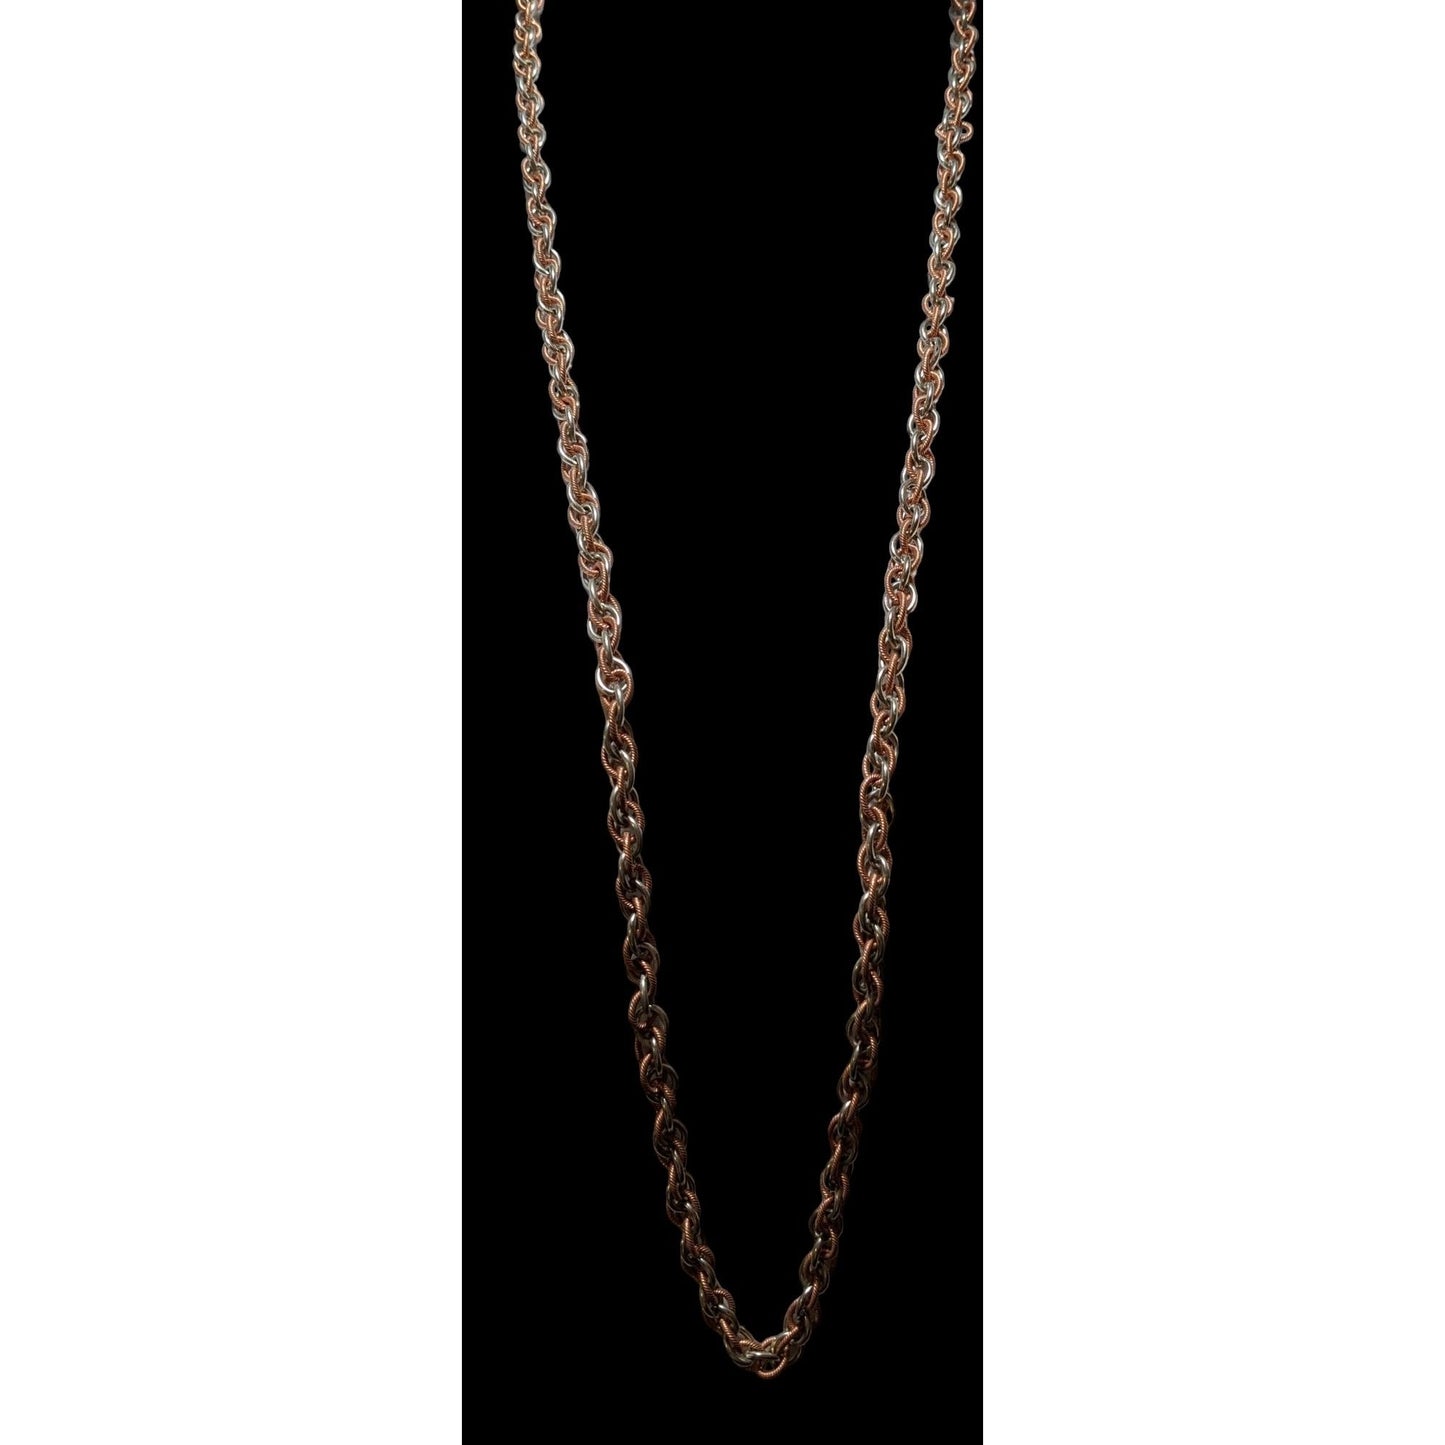 Silver Sopper Intertwined Chain Necklace